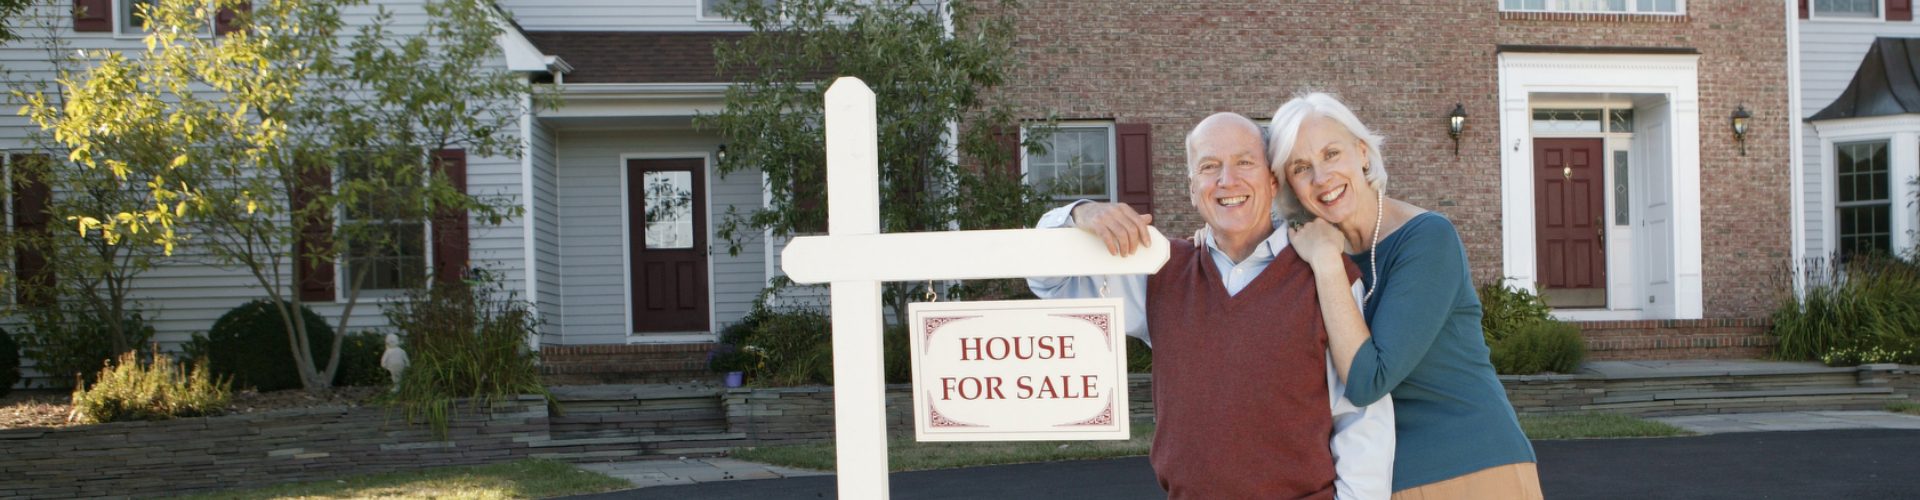 a man and woman standing in front of a house for sale sign